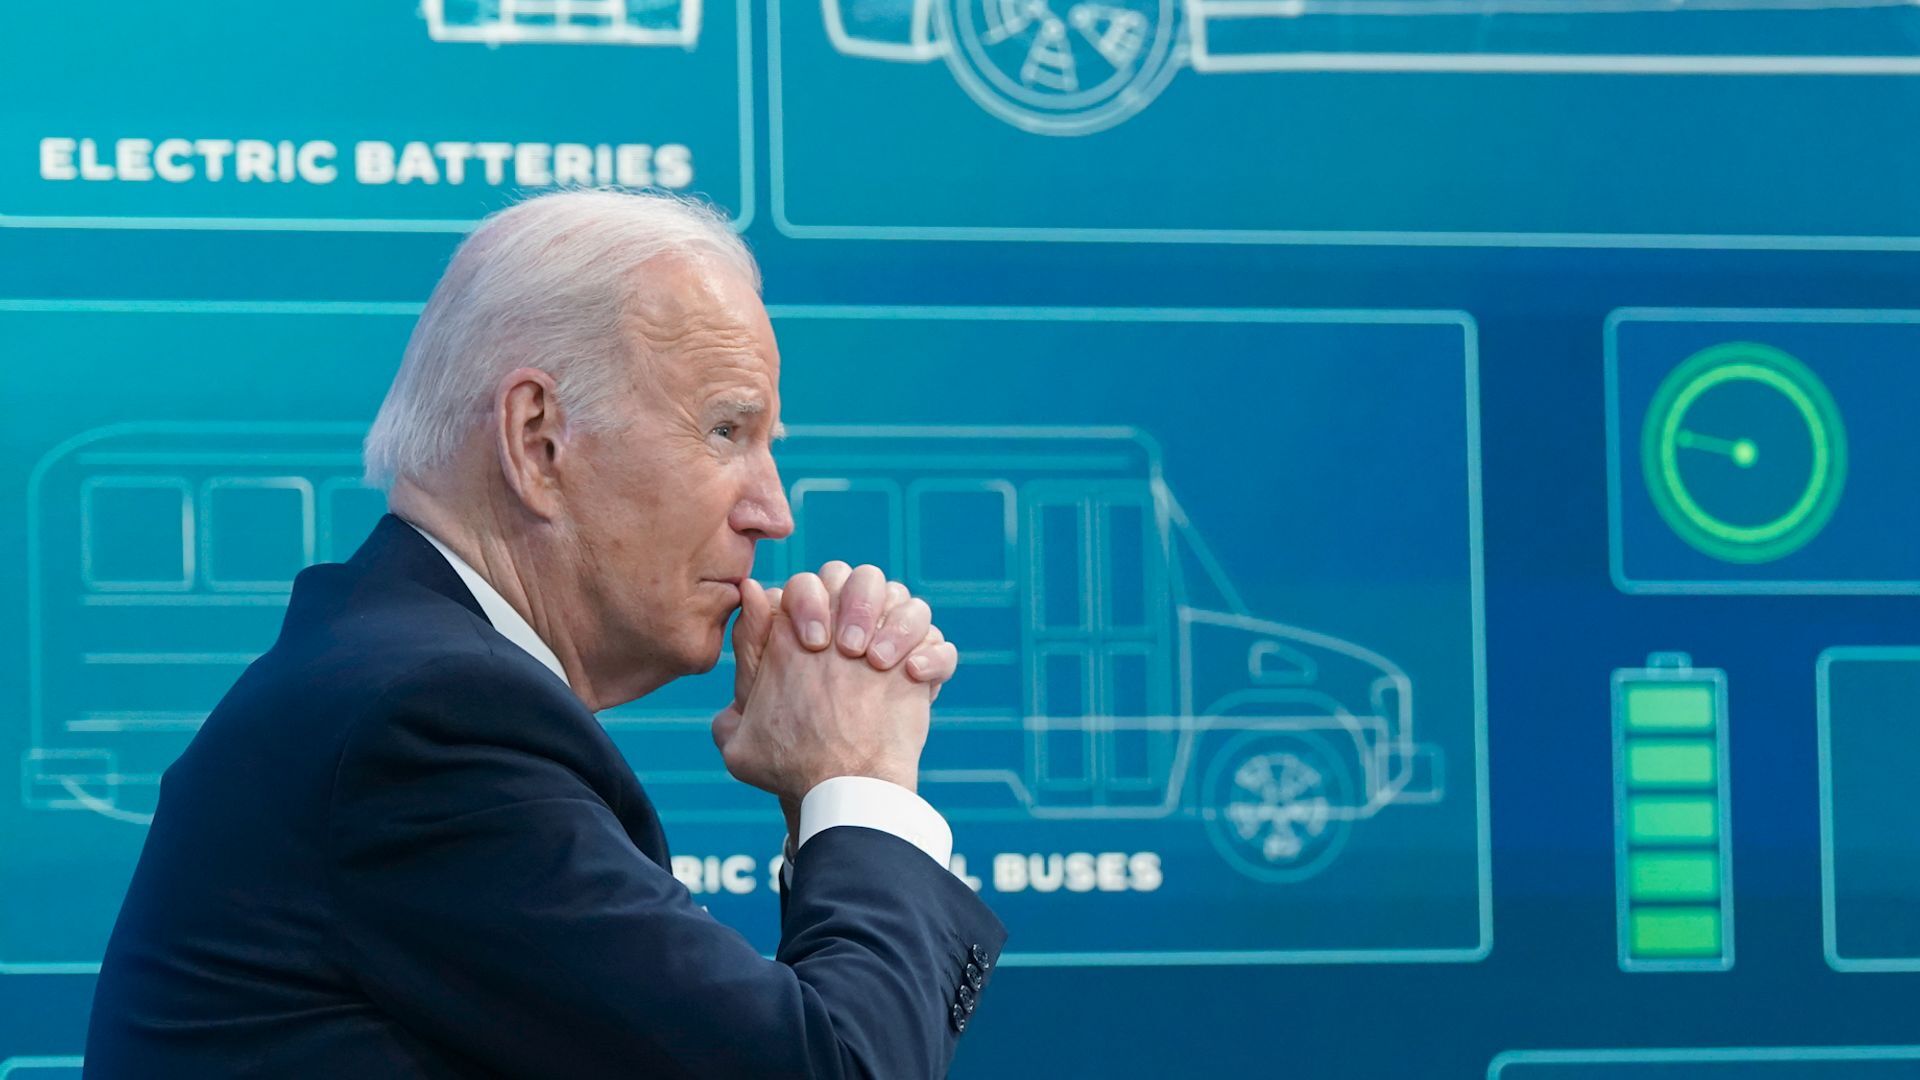 The Biden administration's new EV tax credit exemption means more savings for U.S. consumers, but also potentially higher profits for China.